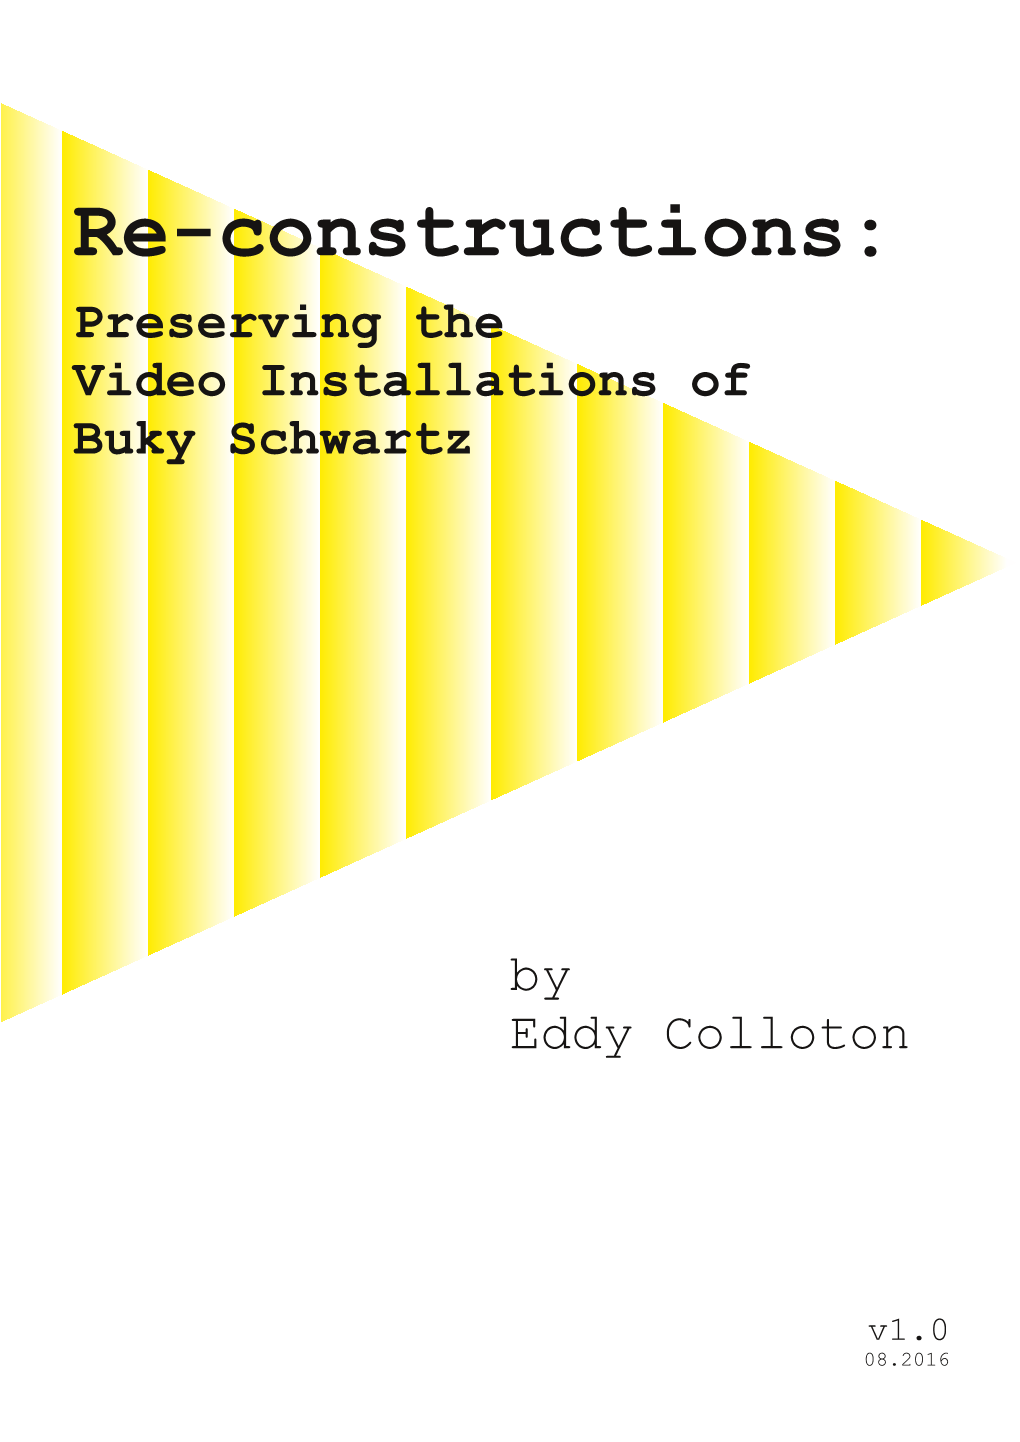 Re-Constructions: Preserving the Video Installations of Buky Schwartz 2